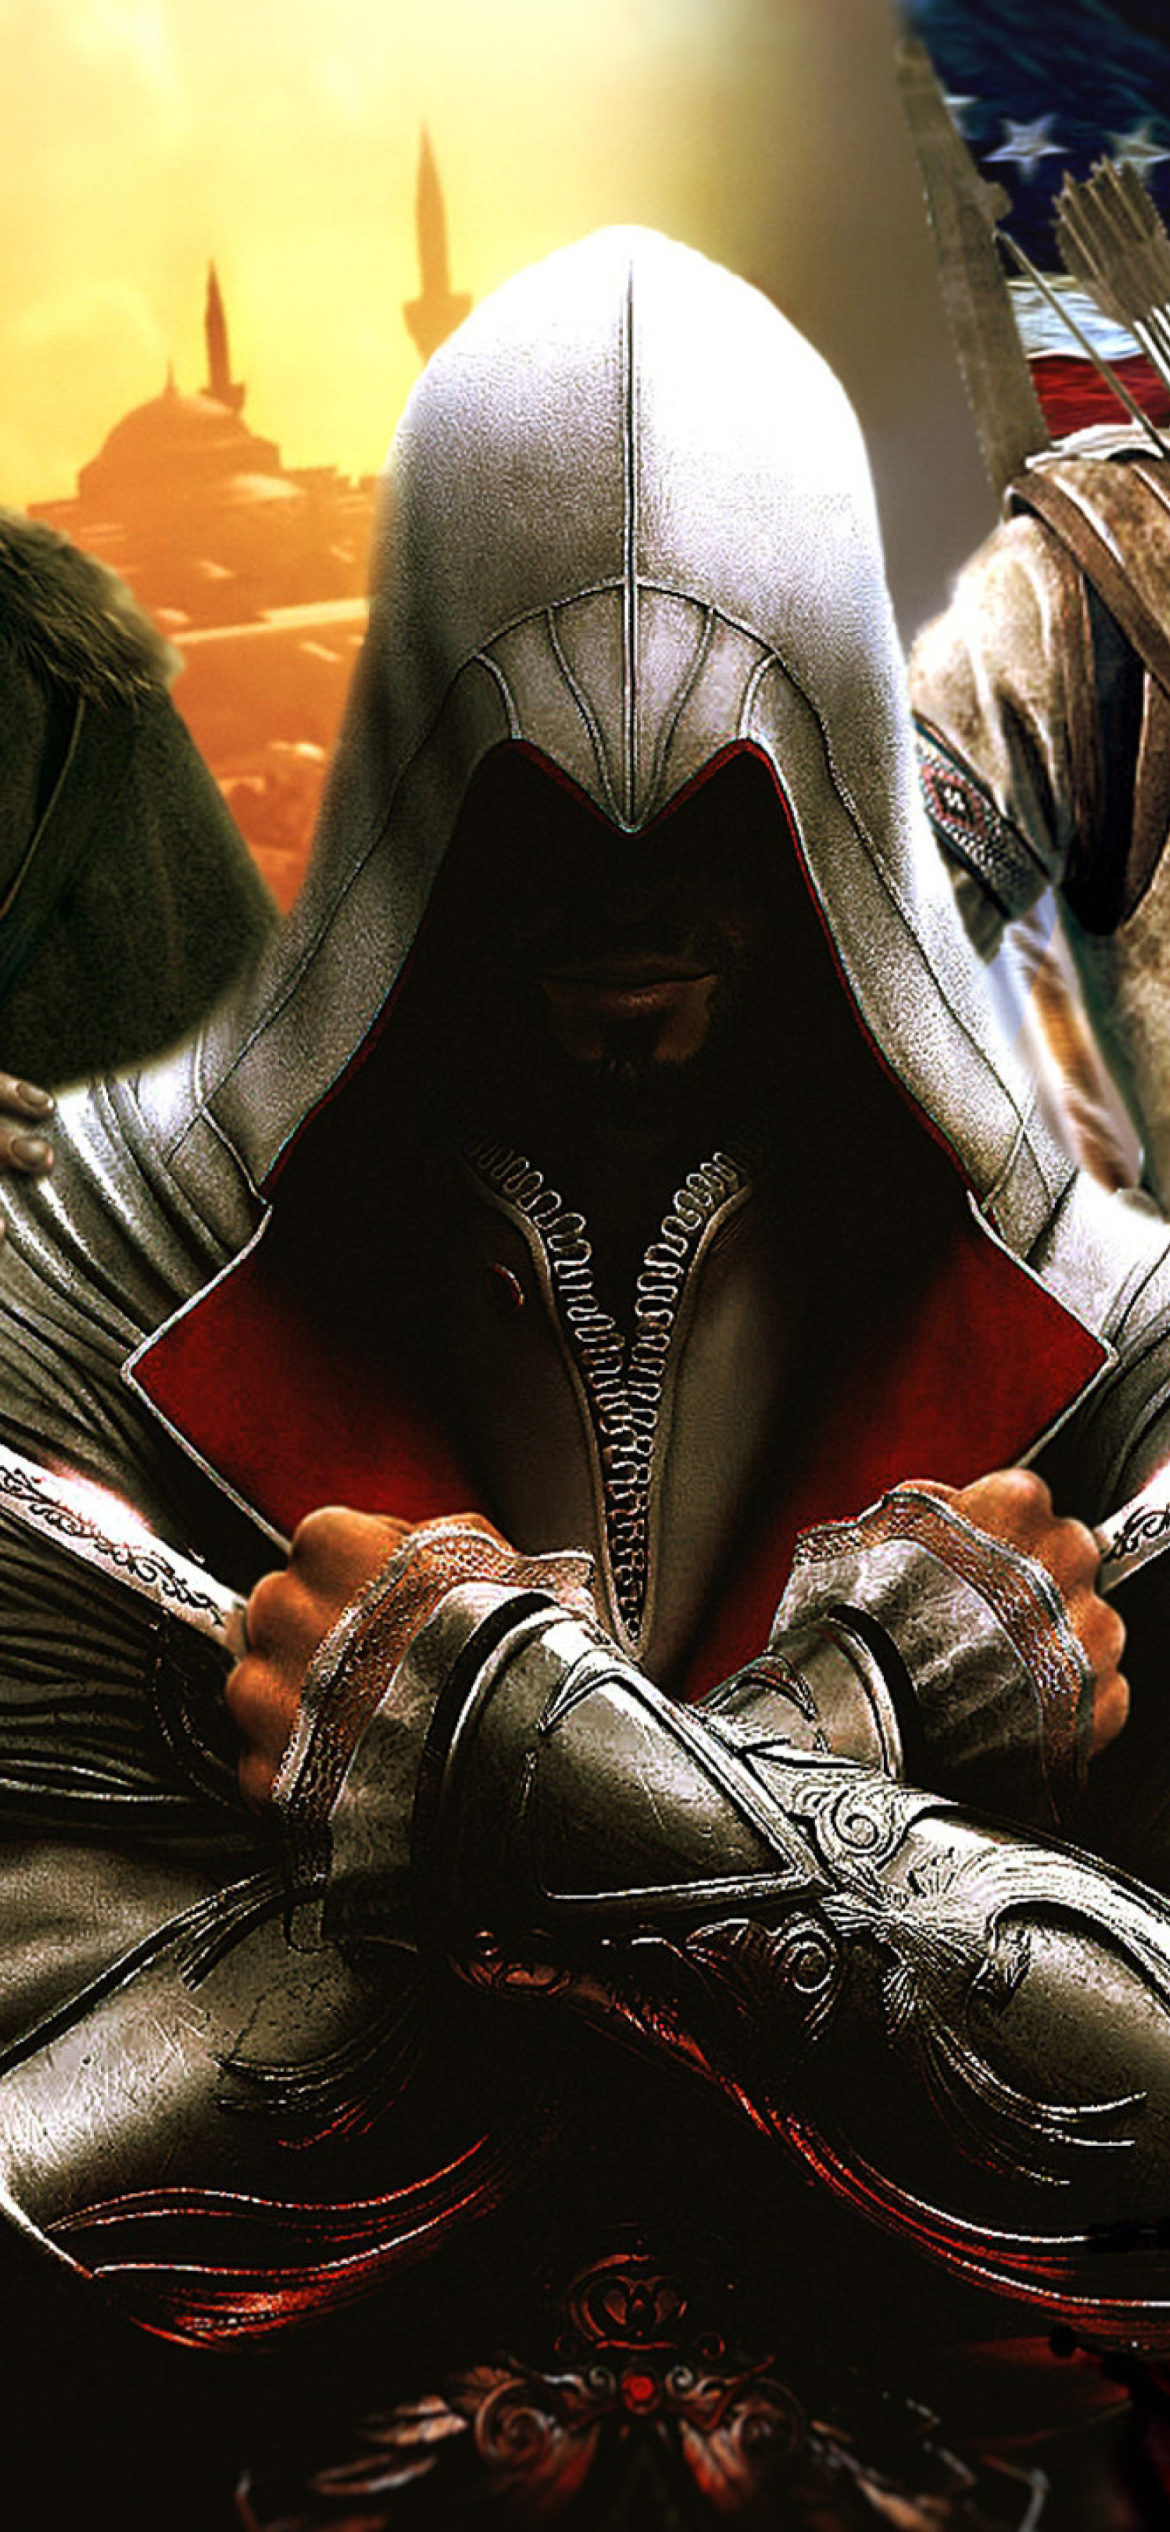 Assassin's Creed Valhalla Wallpapers - Top 65 Best Assassins Creed Valhalla  Backgrounds